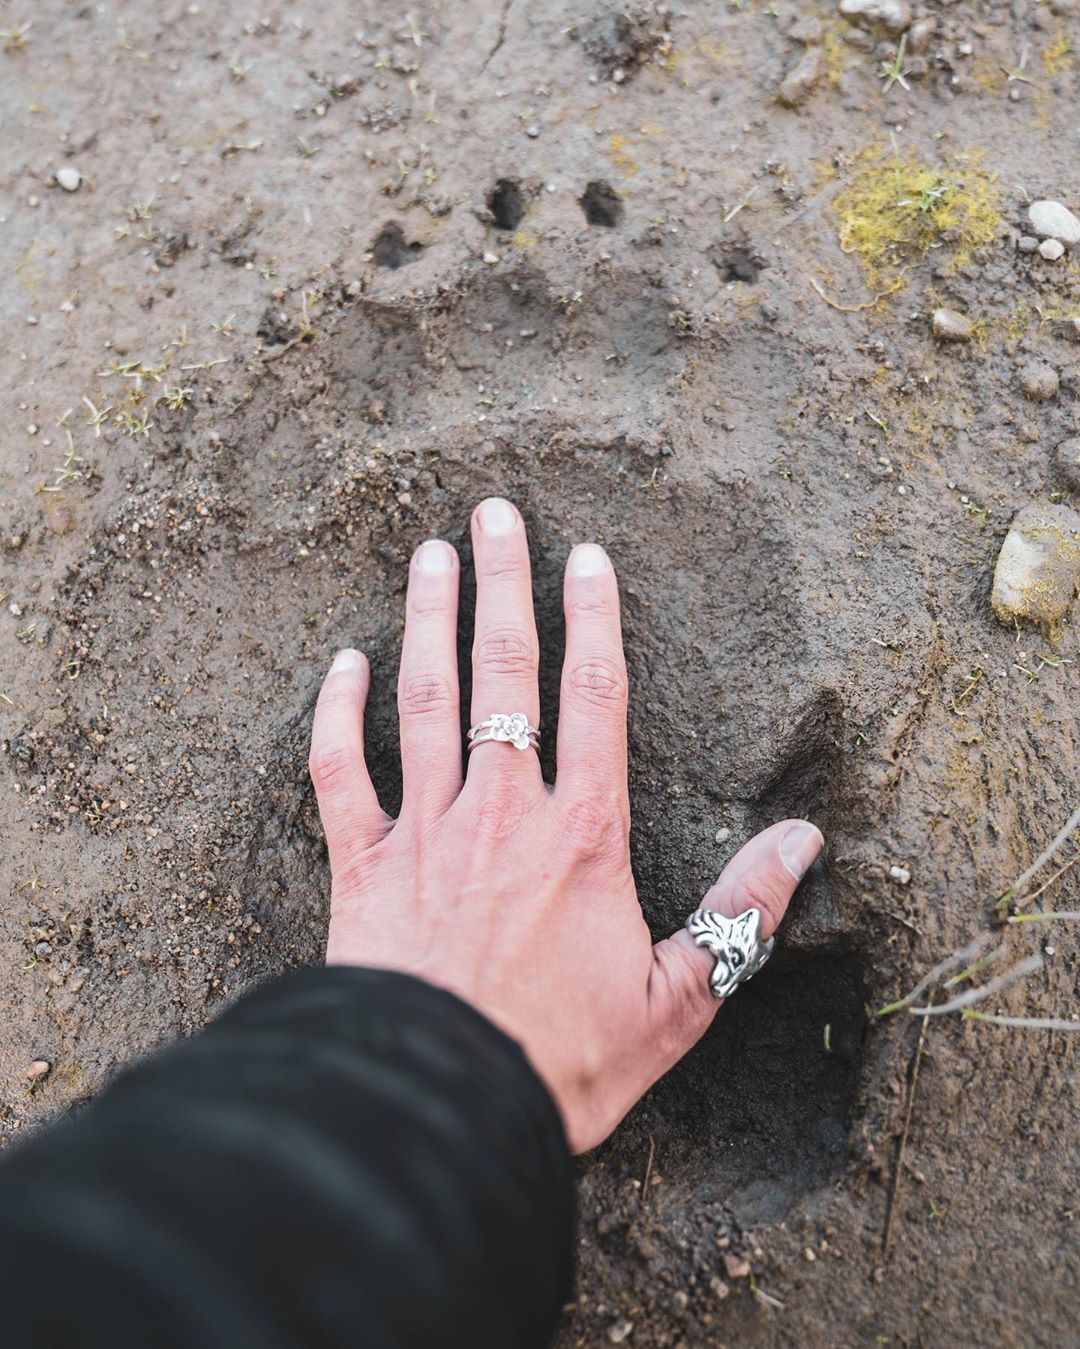 A hand with the black sleeve of jacket wearing a silver ring on the thumb visible, as it presses down on a much bigger paw print on brown mud